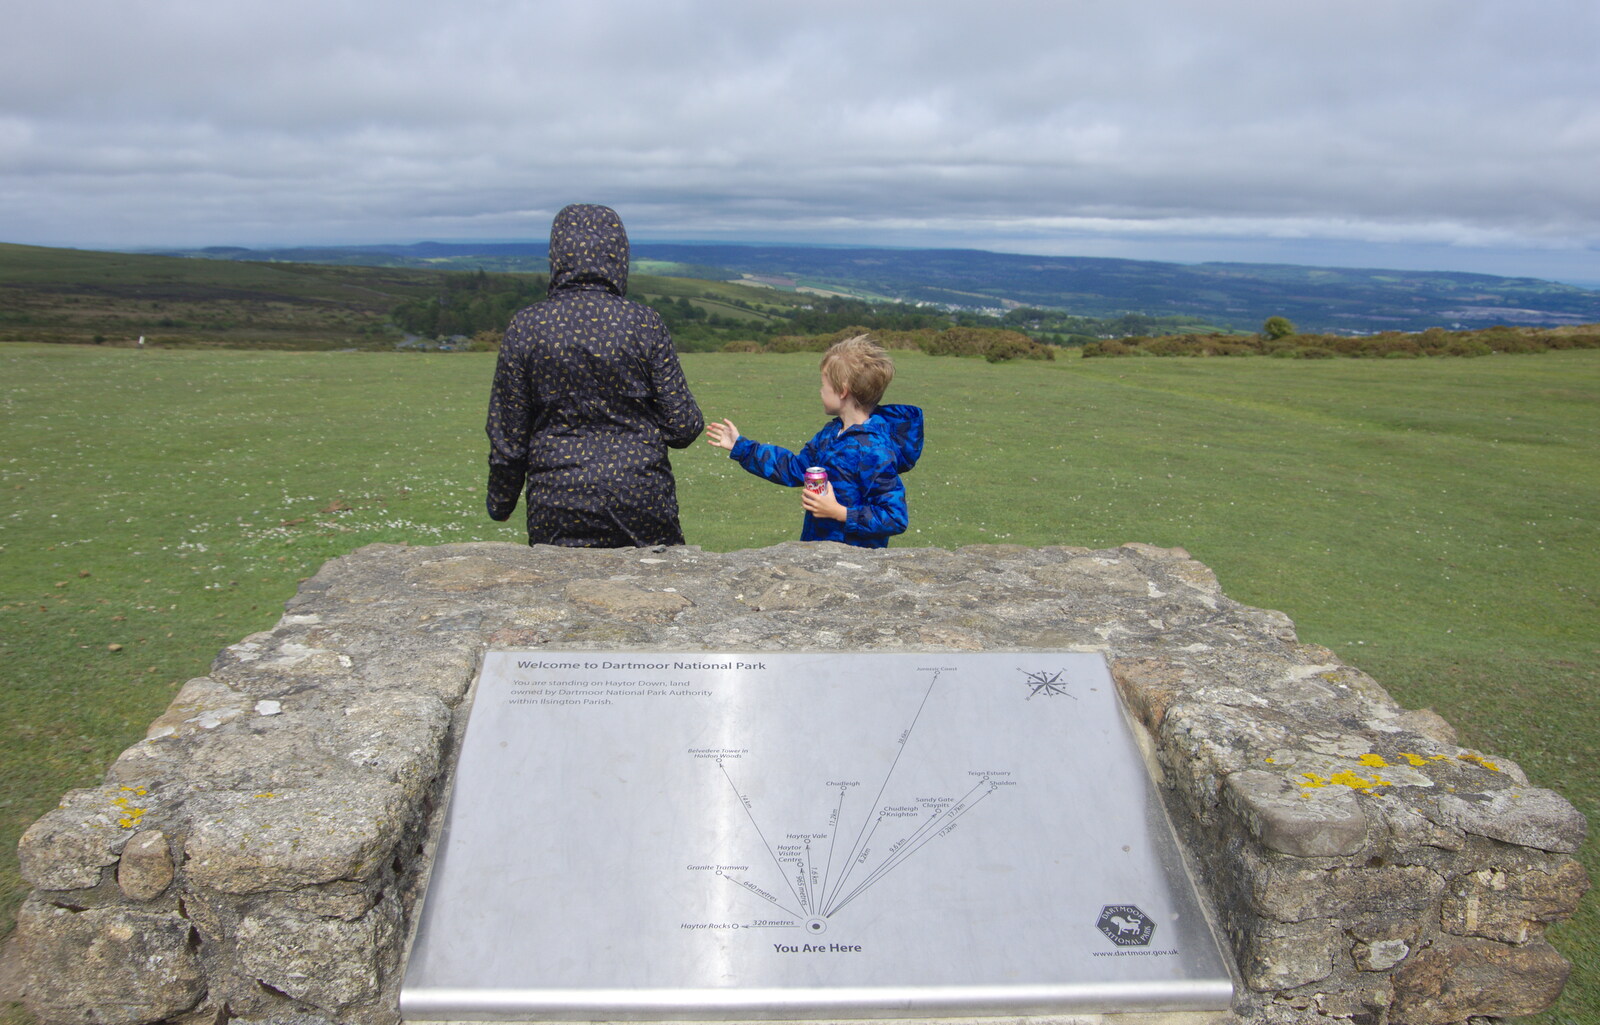 A 'you are here' information sign from The Tom Cobley and a Return to Haytor, Bovey Tracey, Devon - 27th May 2019